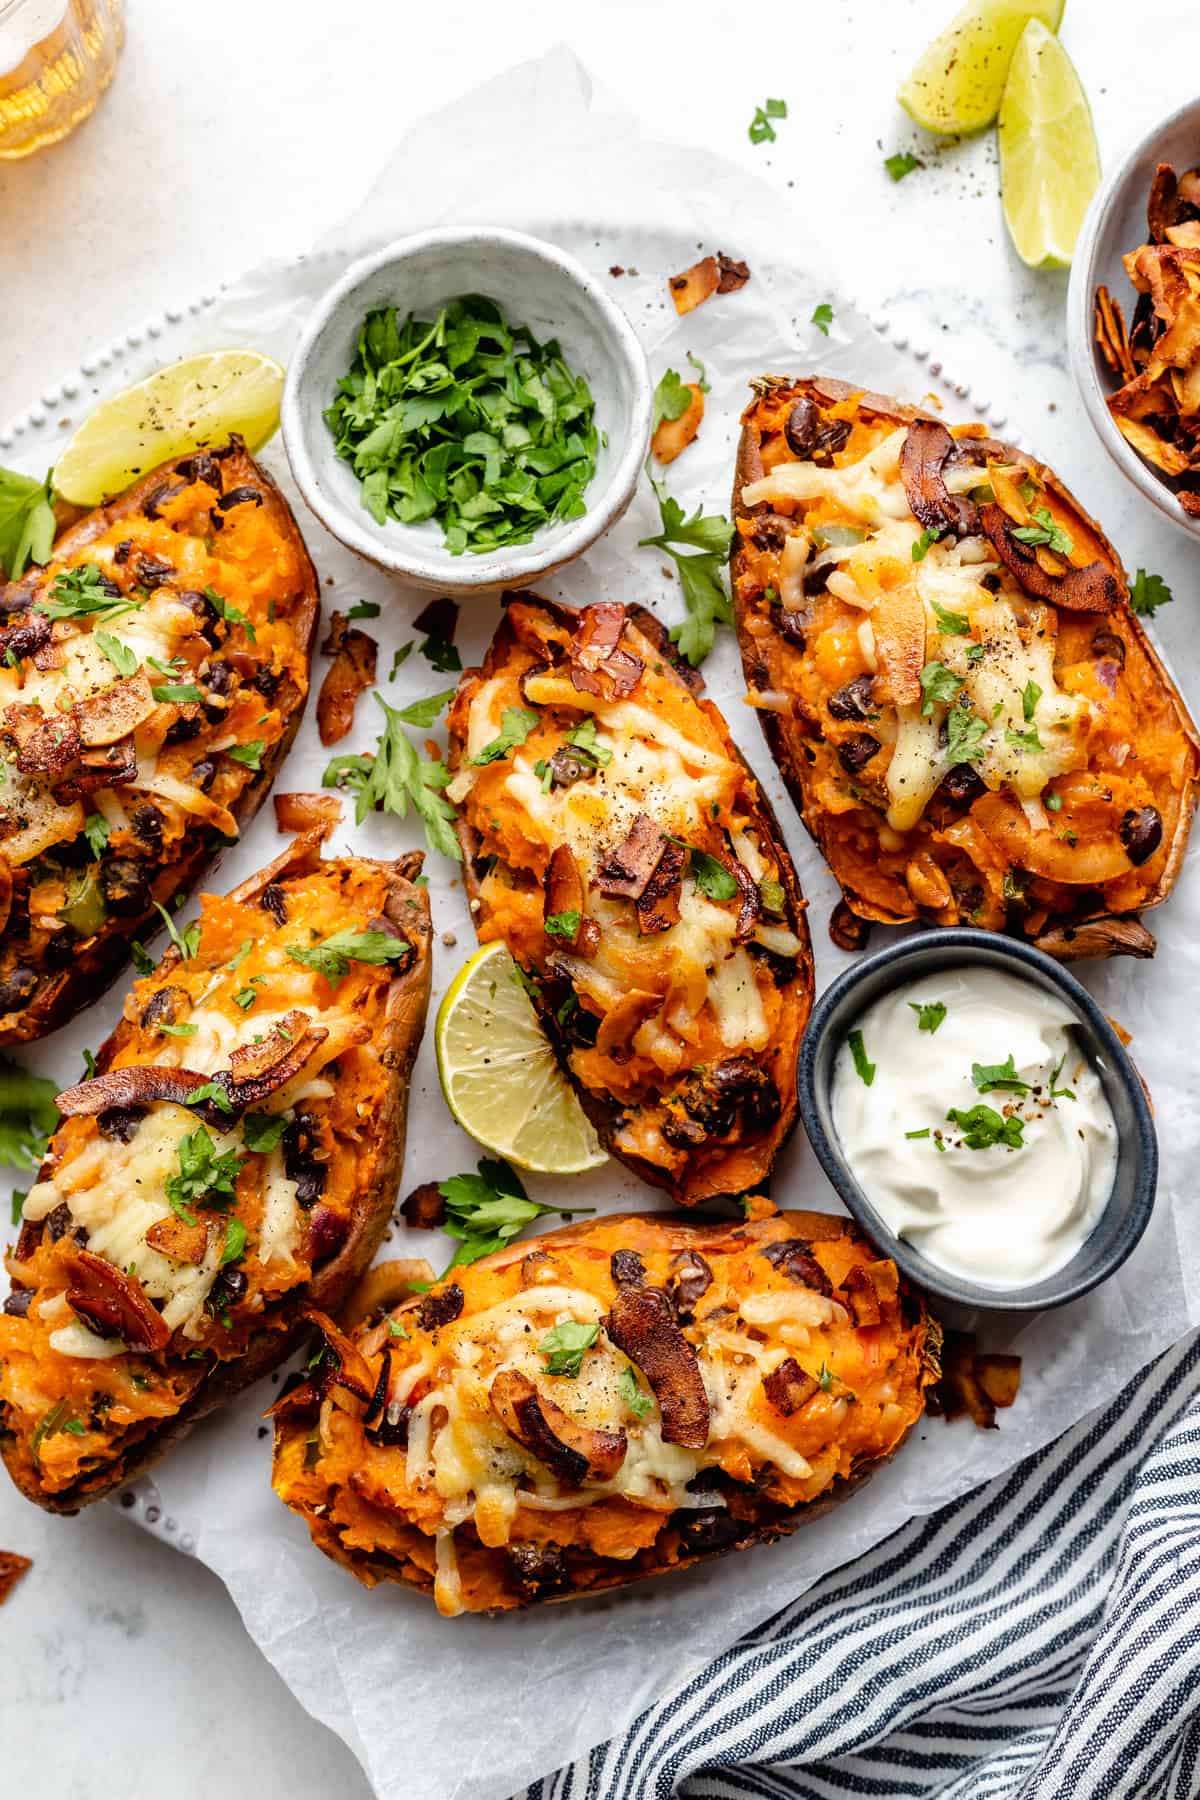 Overhead view of loaded sweet potato skins on plate with bowls of yogurt and cilantro